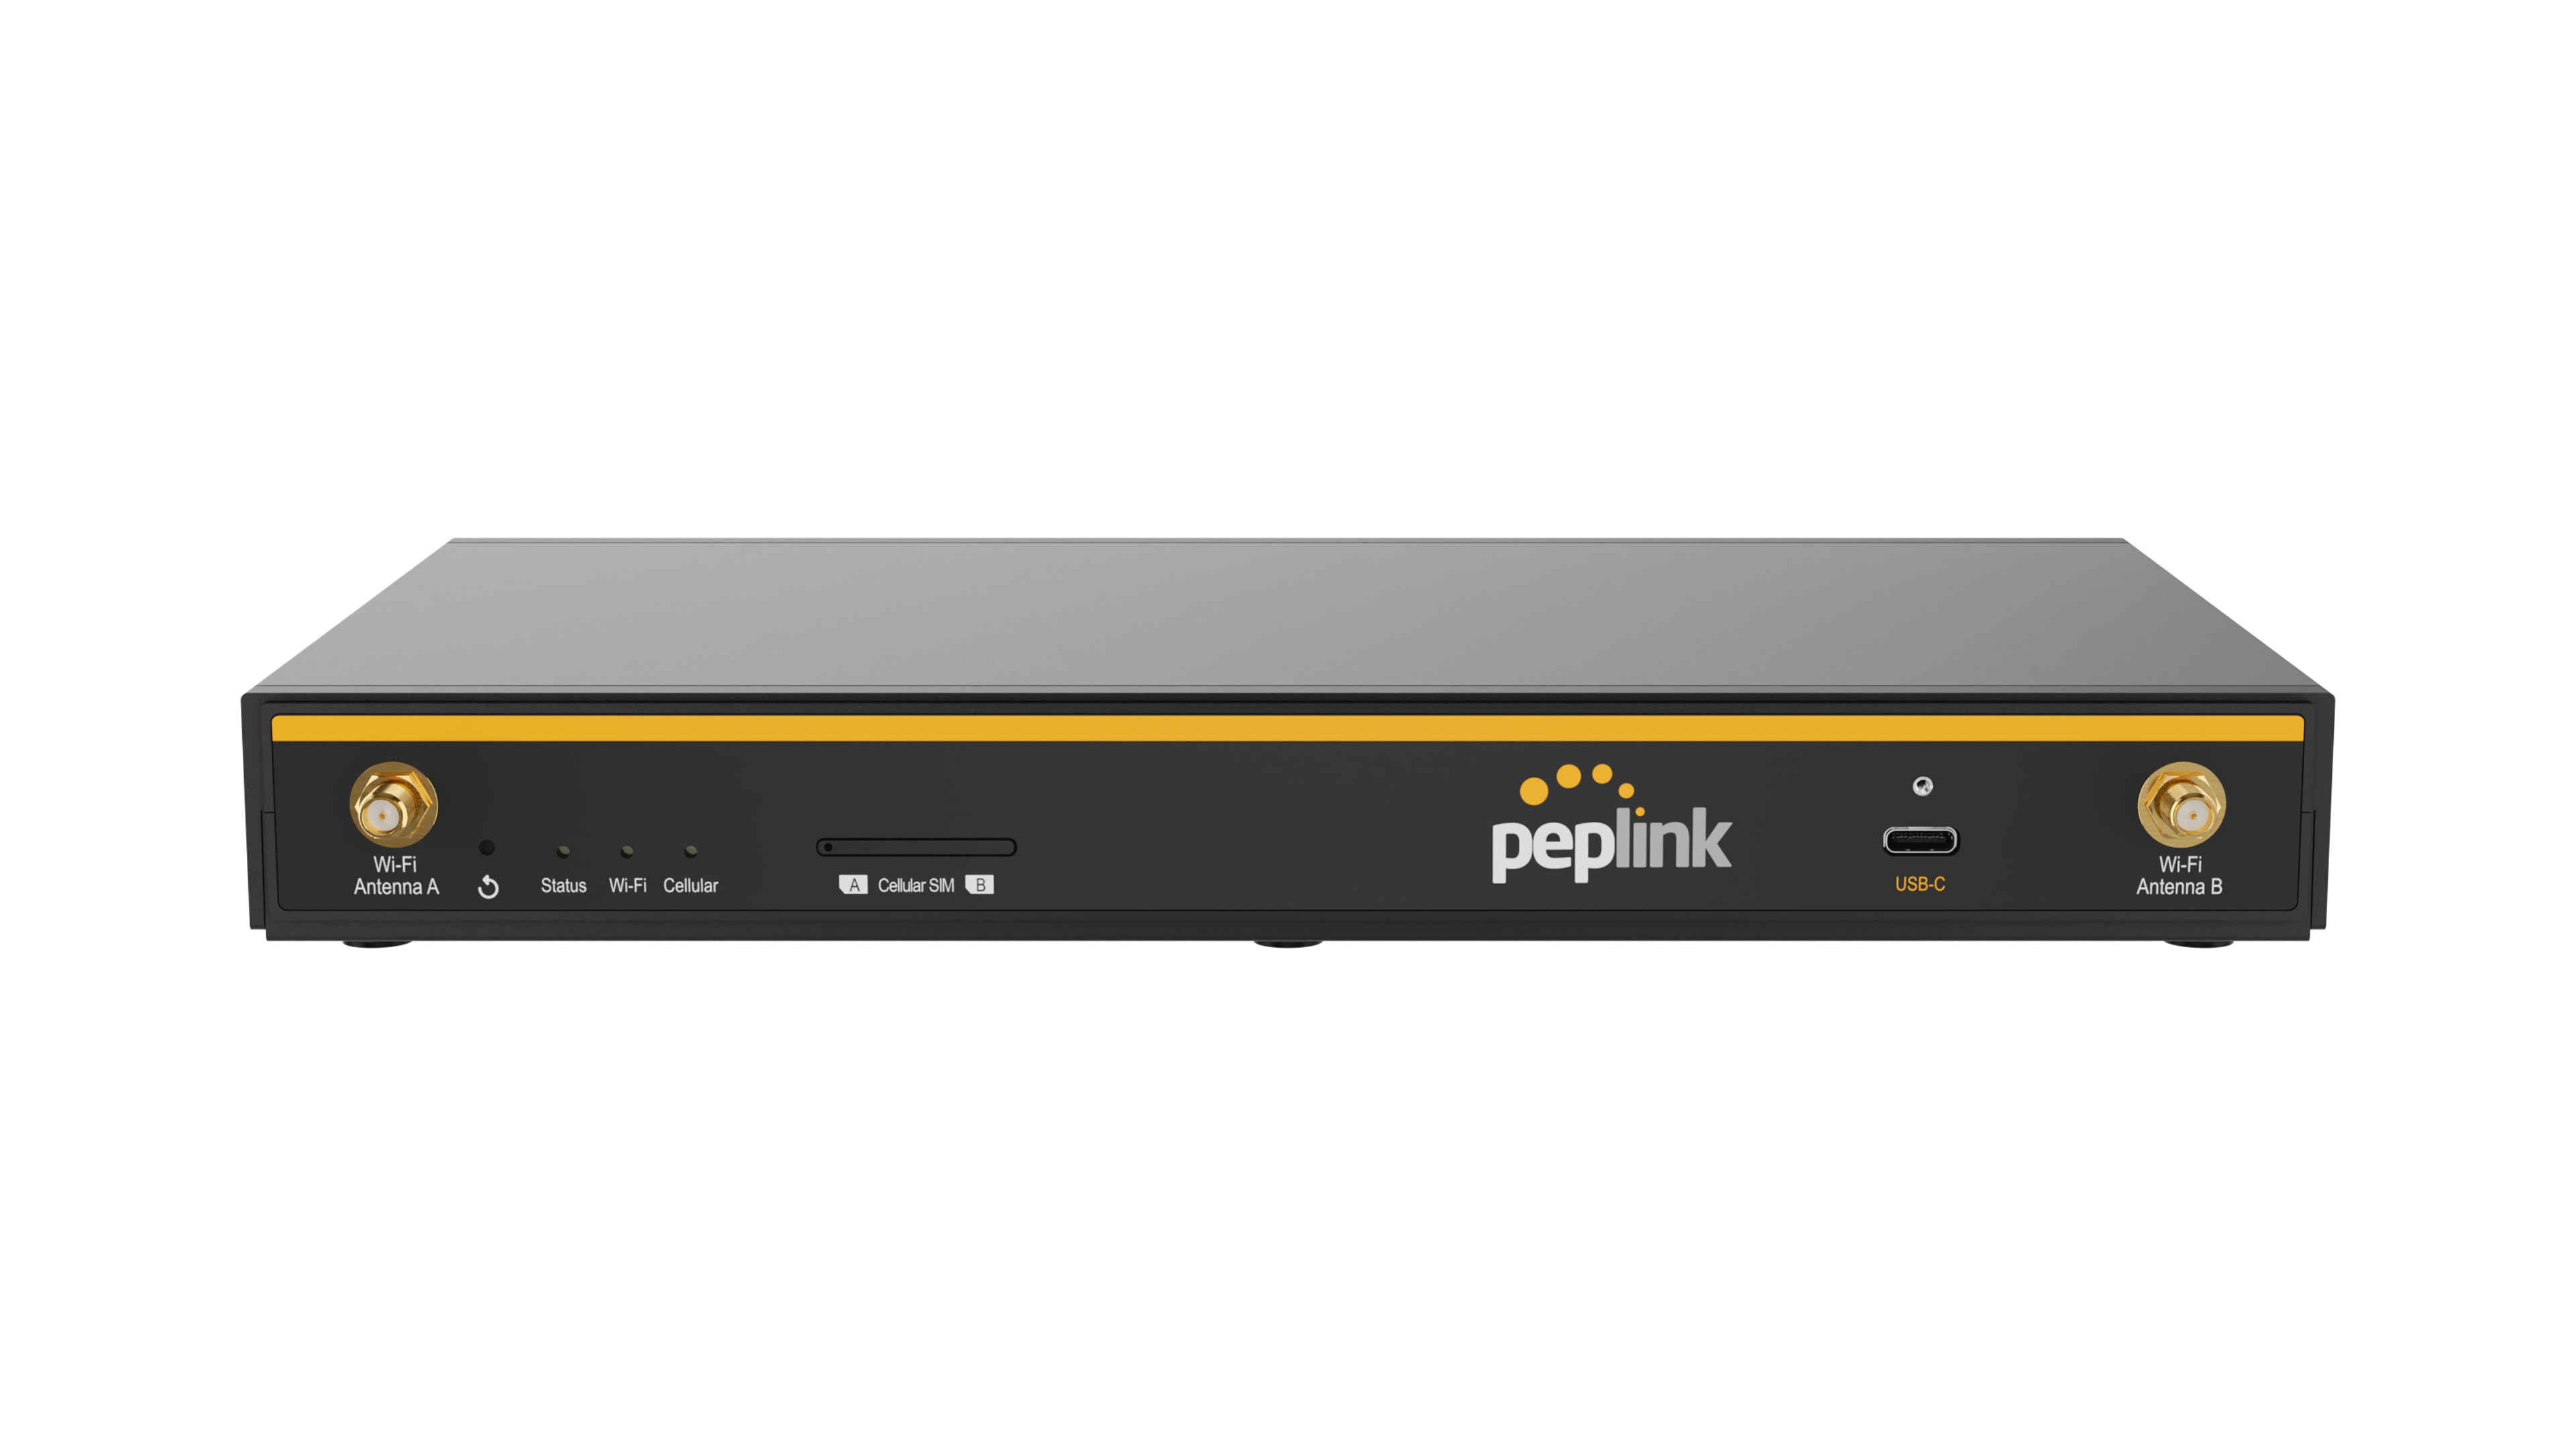 Peplink B One 5G Cellular Router